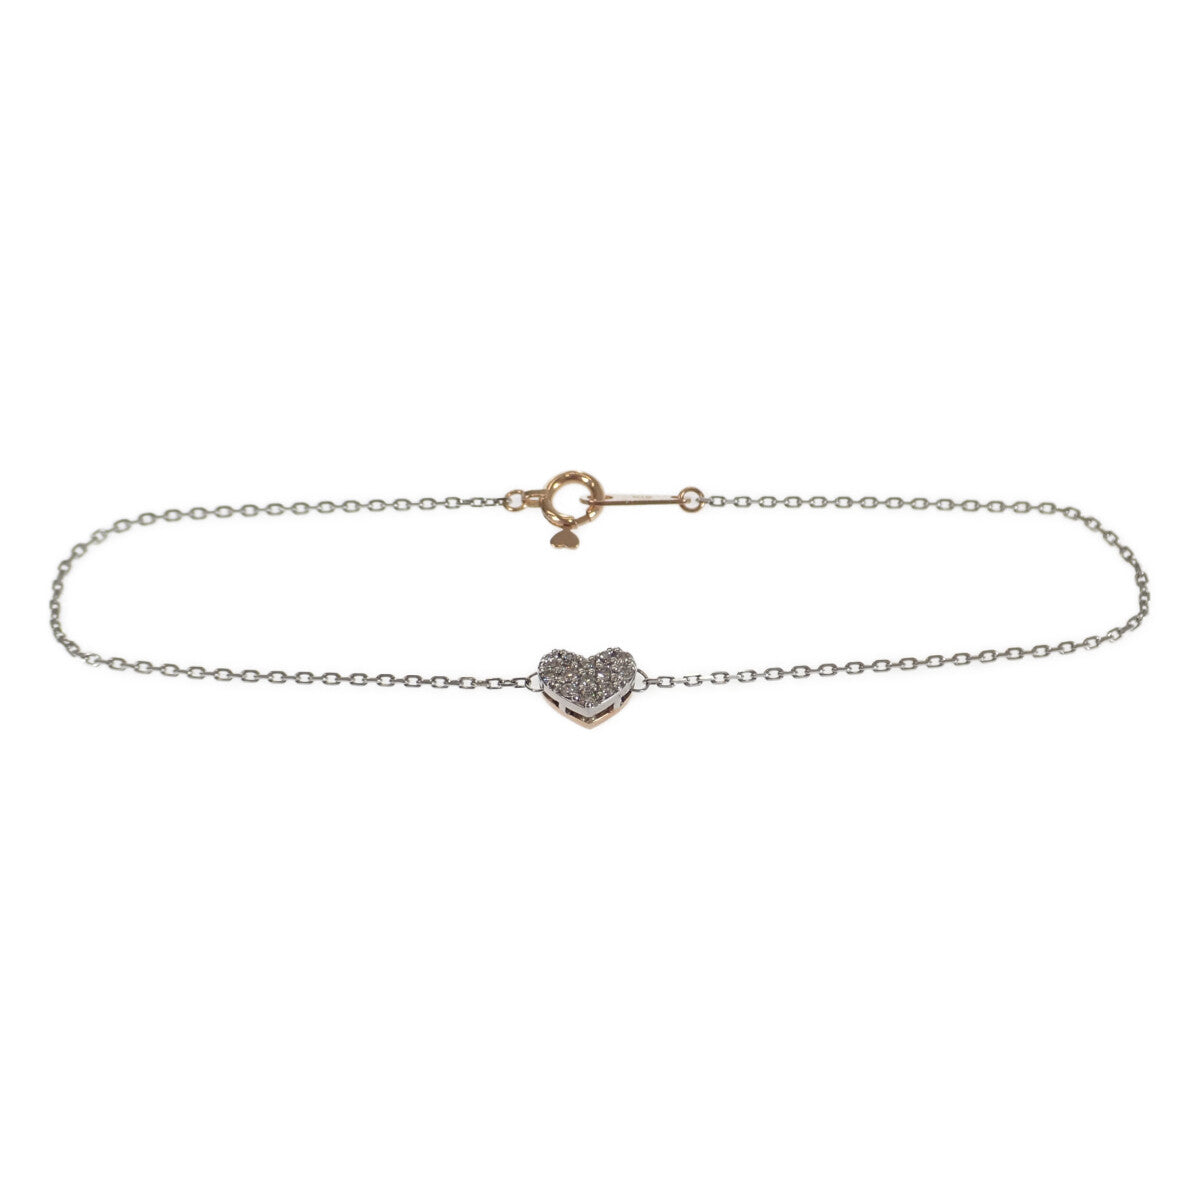 [LuxUness]  Heart Bracelet in K18 Pink Gold & Platinum Pt900 850 with Diamonds 0.11ct for Women in Brand new